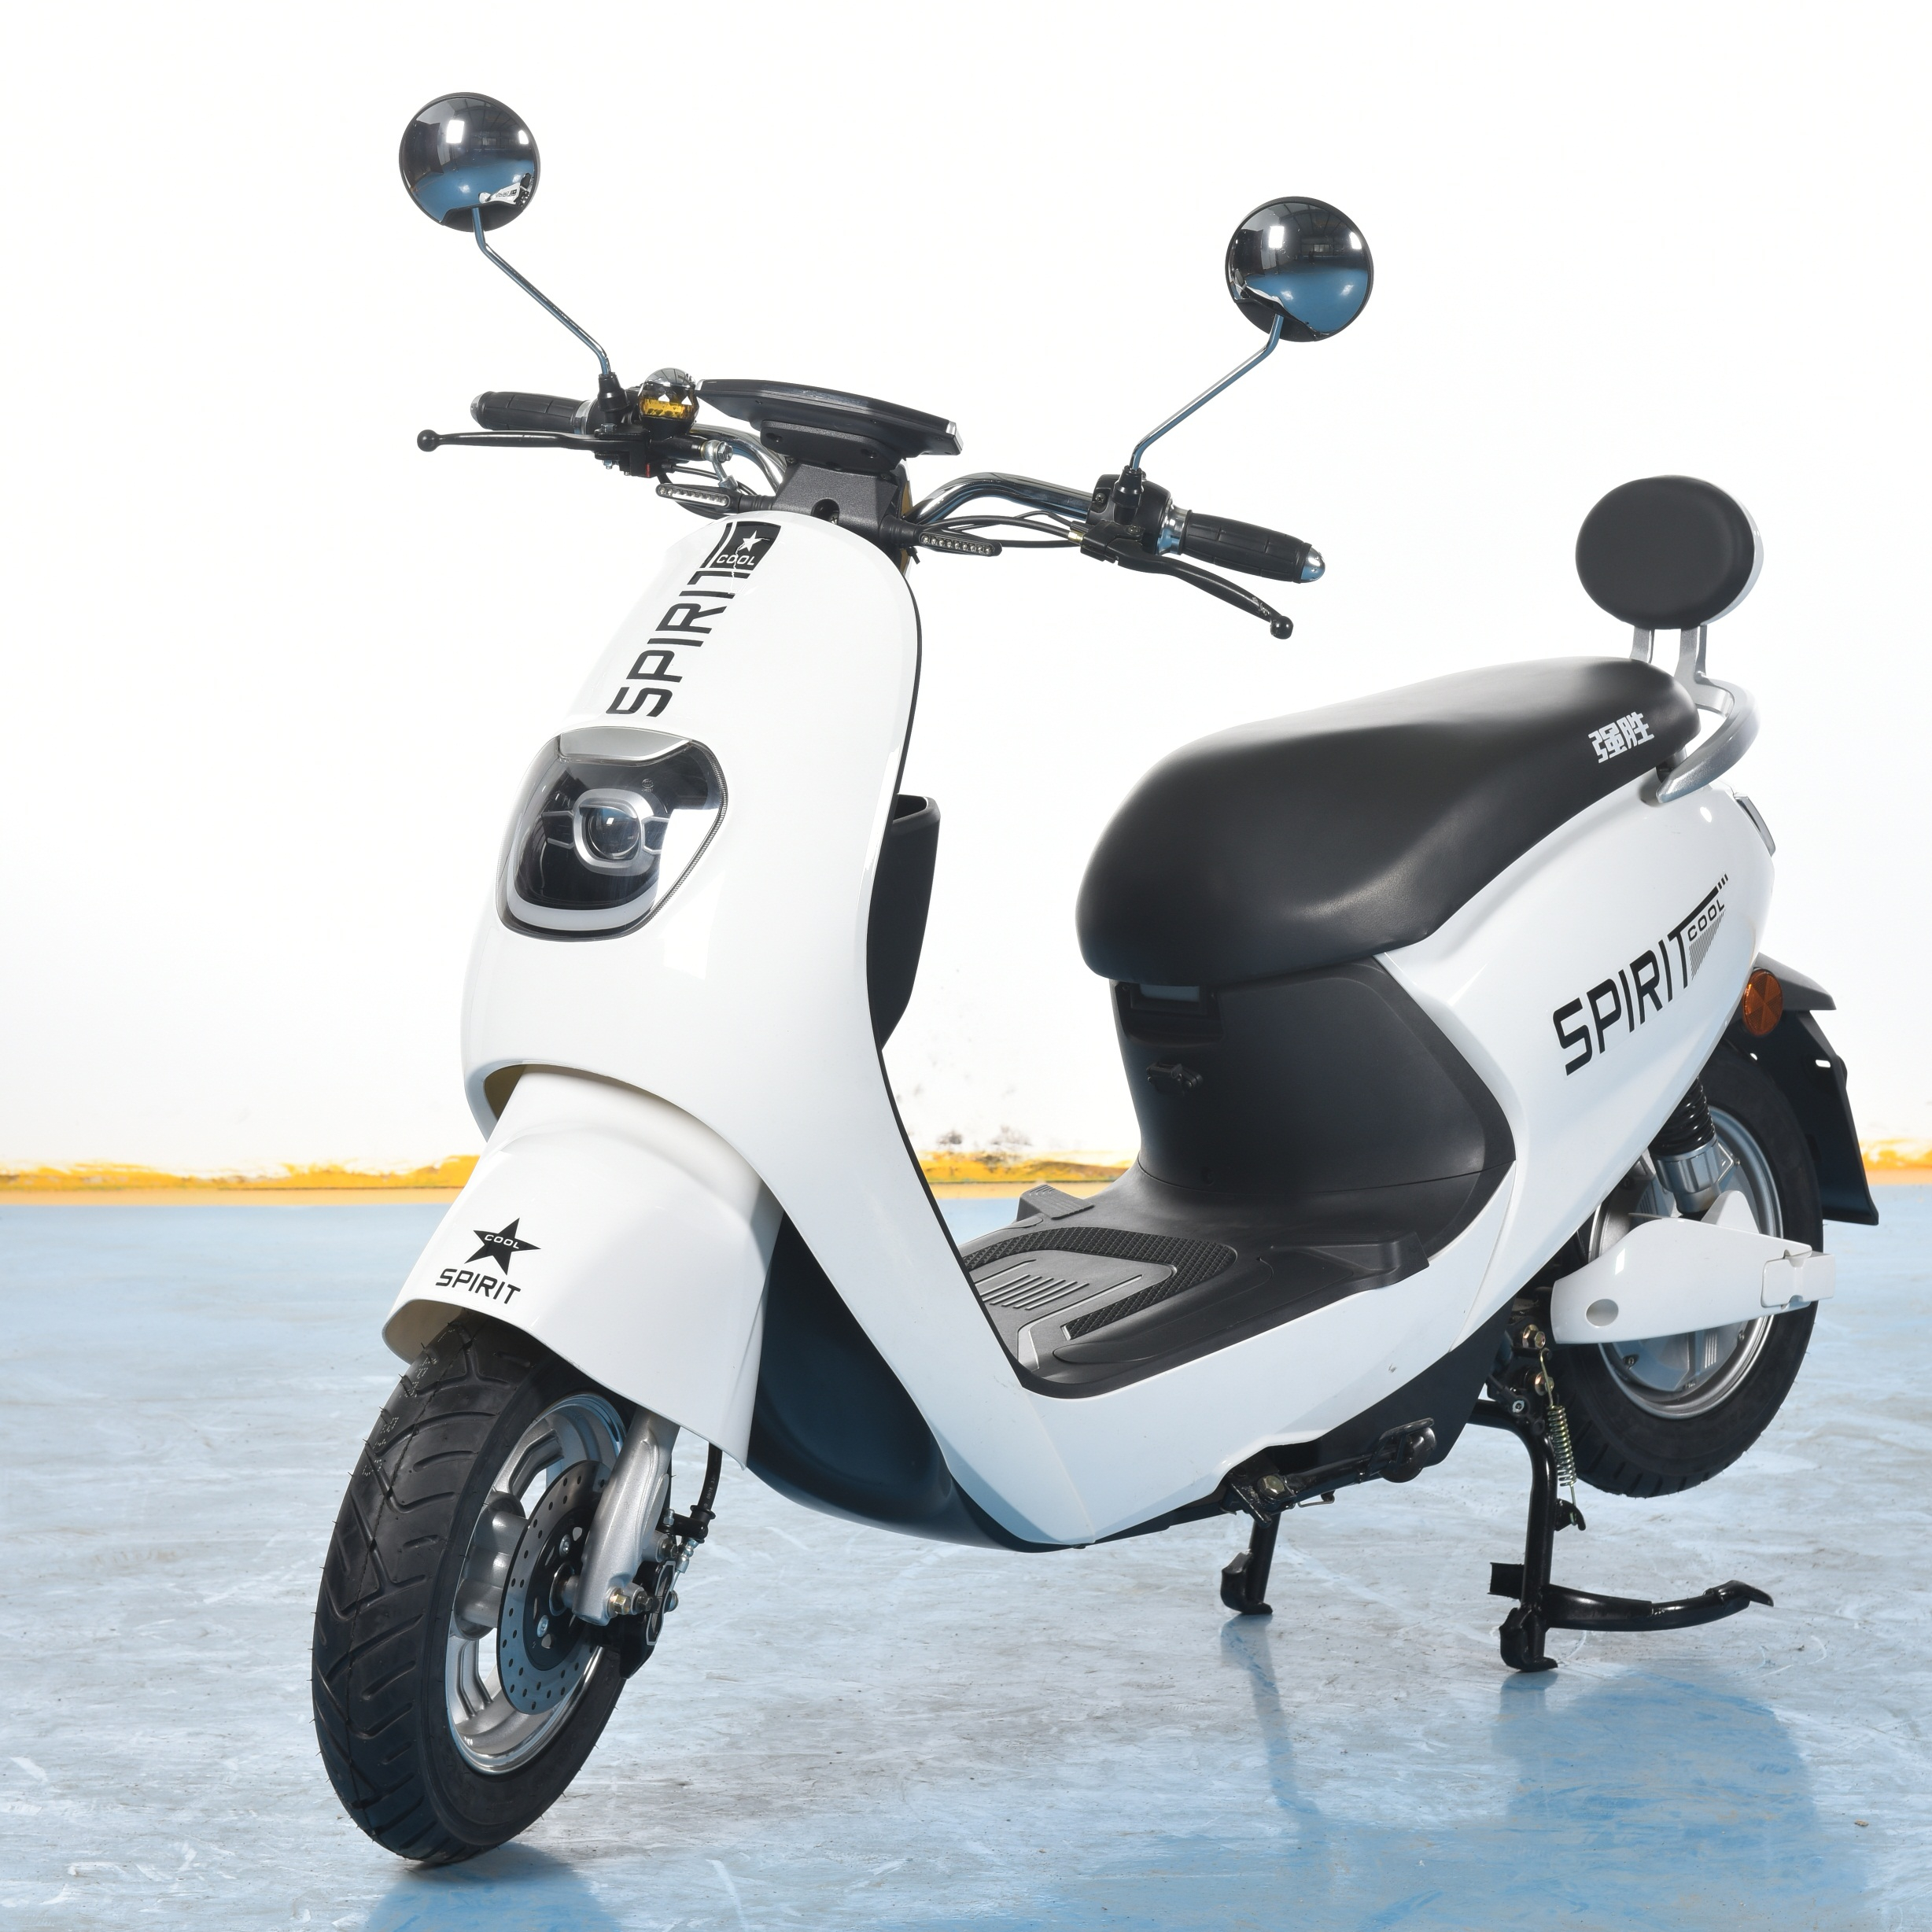 Hot sell electric scooter bajaj bike cheap price supplier Featured Image